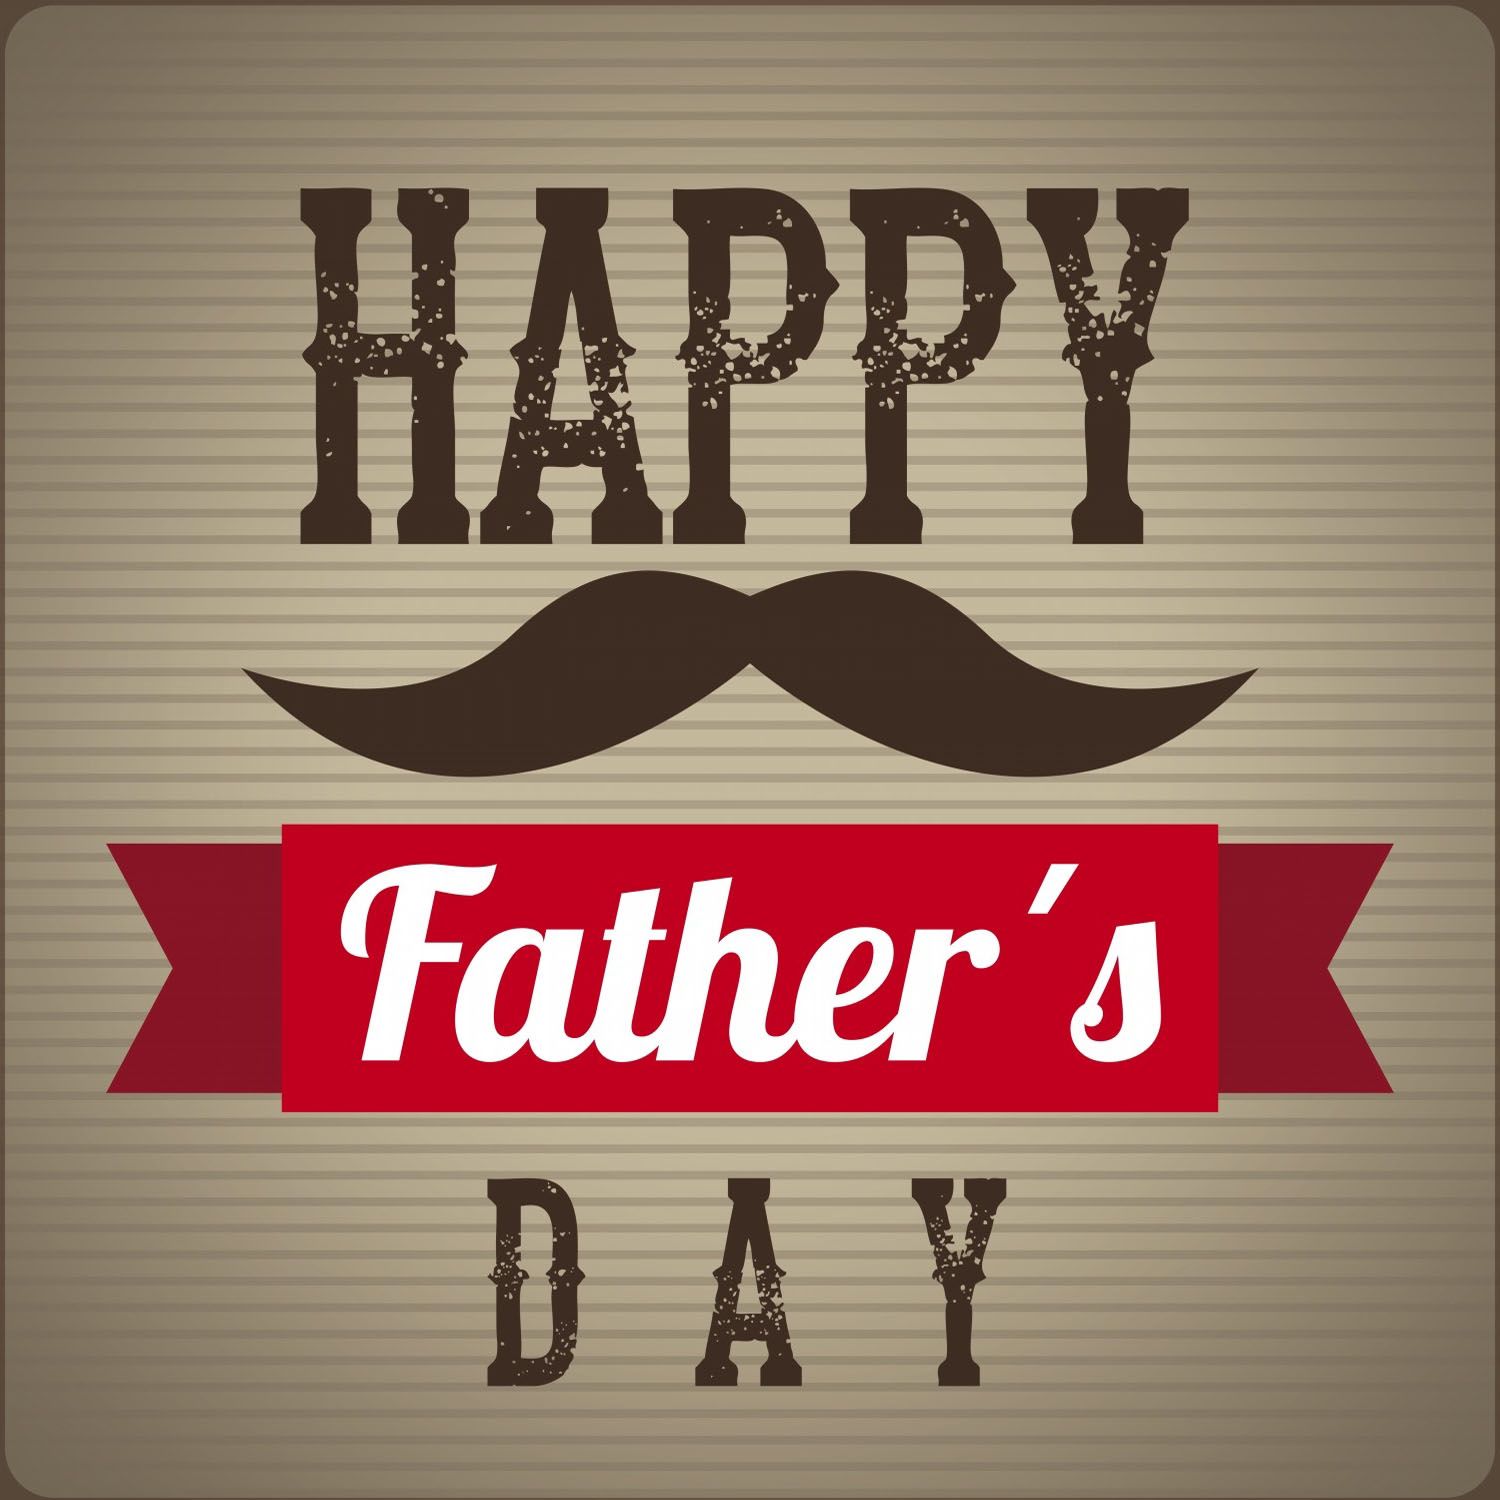 Free download Happy Fathers Day Image Wallpaper Picture Happy 1500x1500 [1500x1500] for your Desktop, Mobile & Tablet. Explore Happy Father's Day Cards Wallpaper. Happy Father's Day Cards Wallpaper, Happy